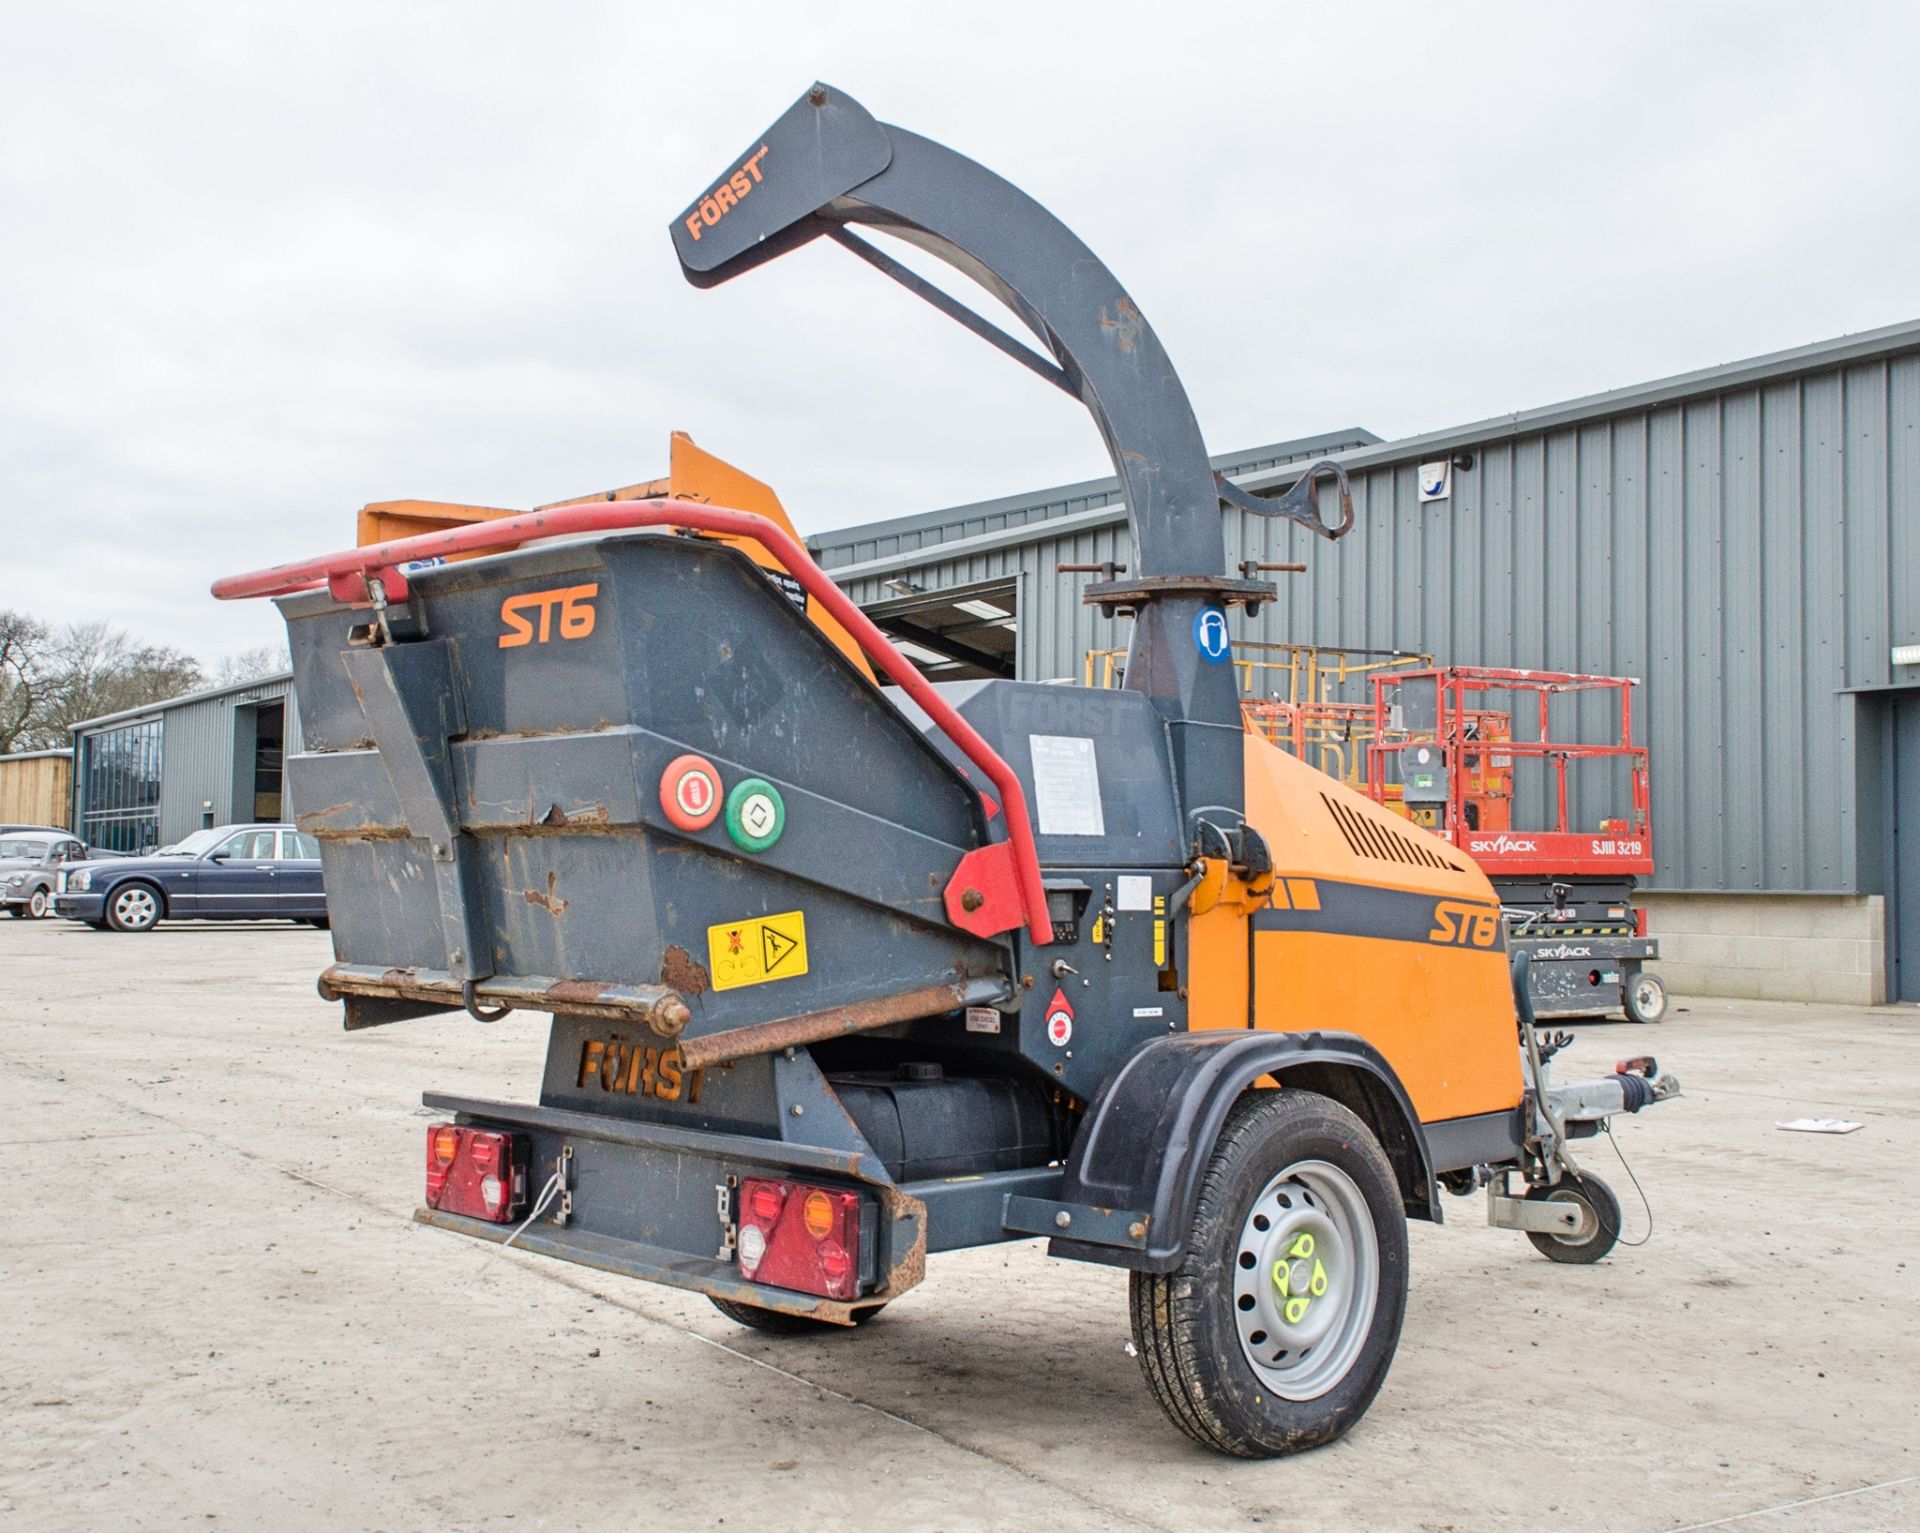 Forst ST6 diesel driven fast tow mobile wood chipper Year: 2014 Recorded Hours: 729 A635390 - Image 3 of 9